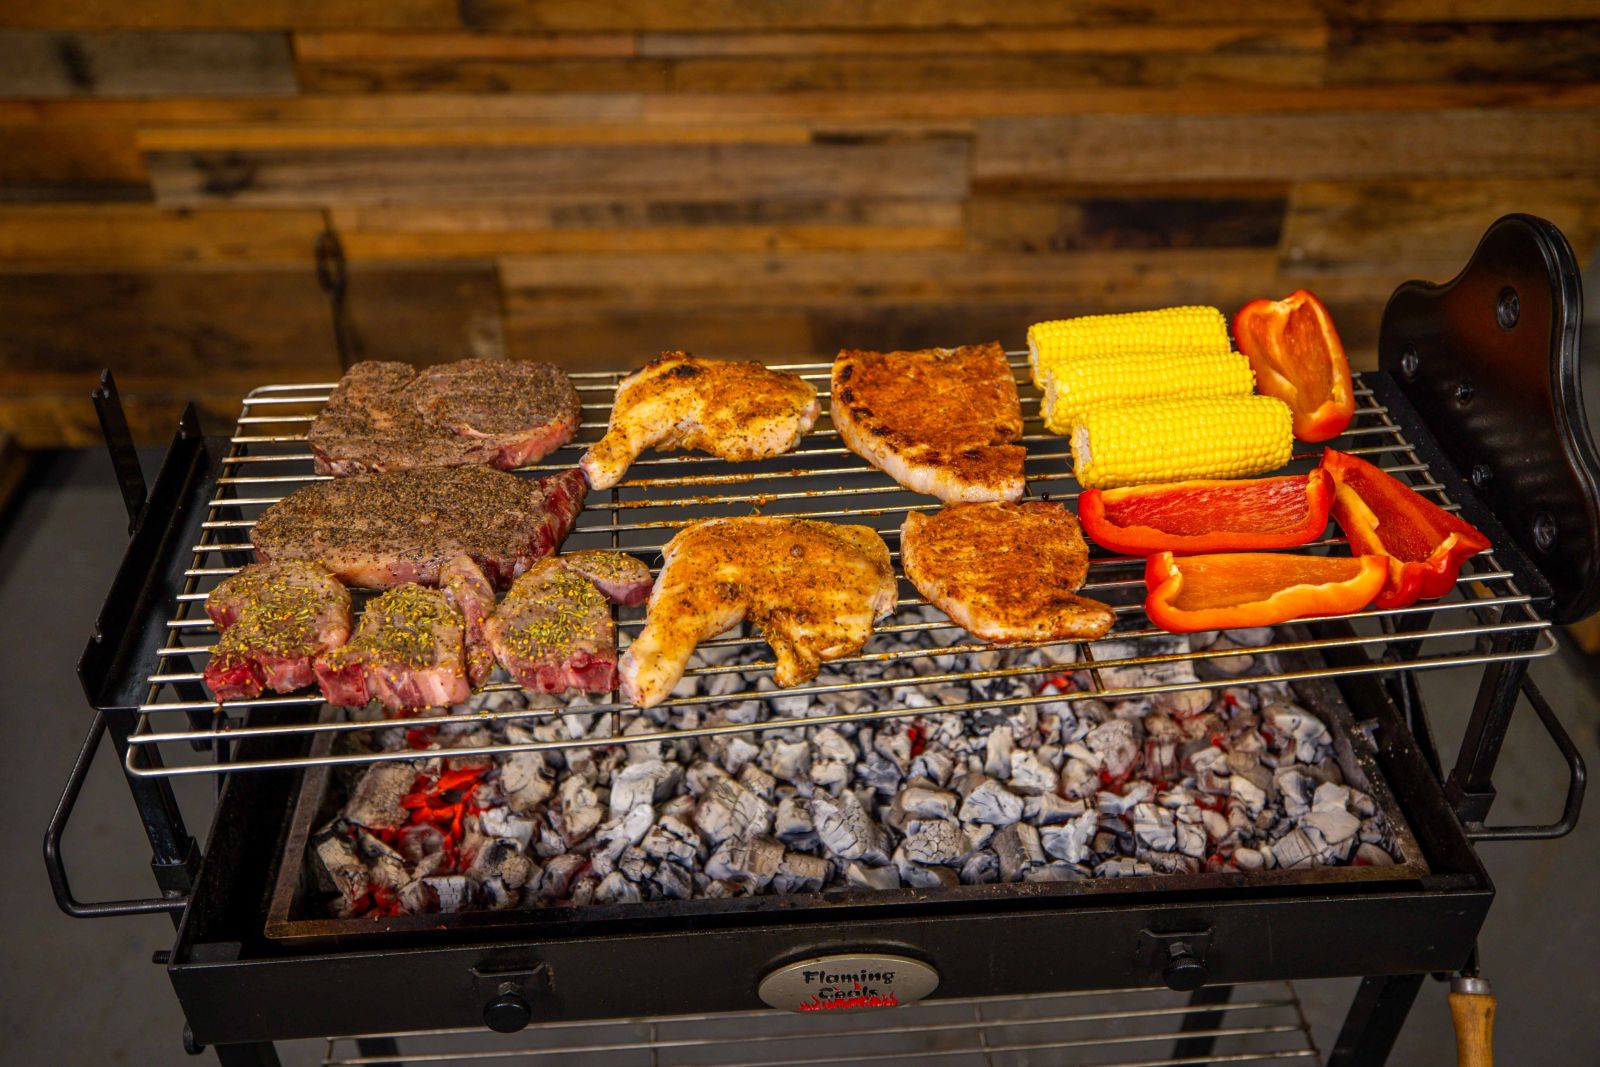 This_image_shows_various_kind_of_meat_being_grilled_on_cyprus_grill